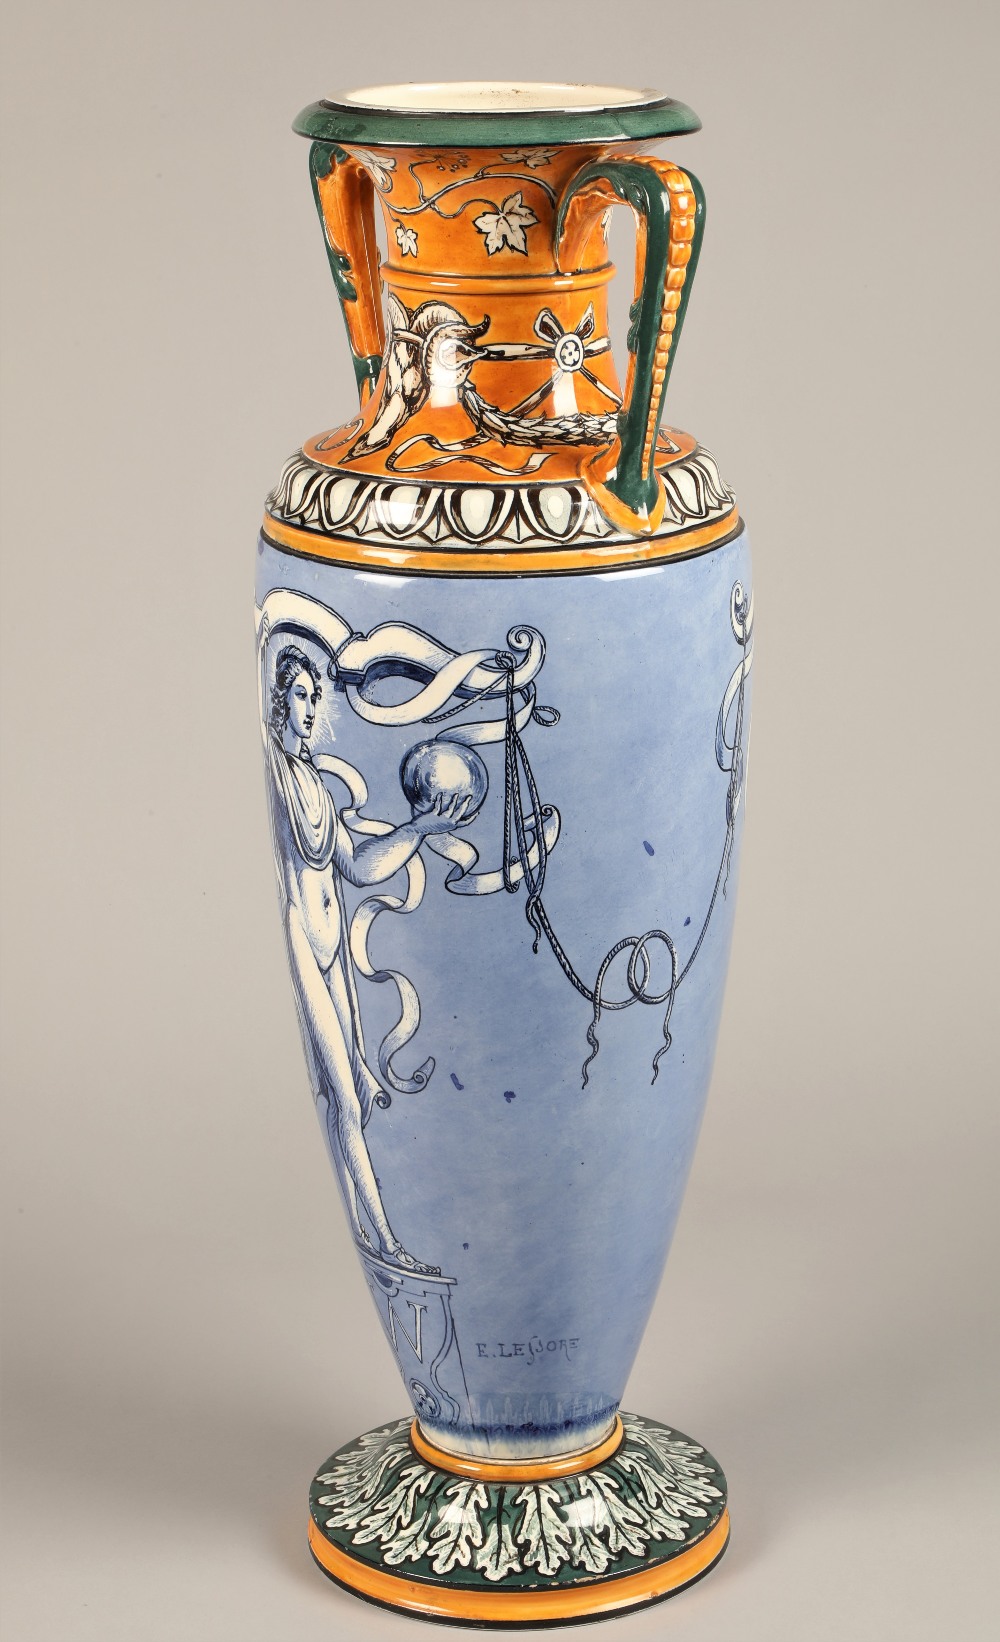 Large Wedgwood queensware vase painted by Emile Lessore of signature baluster form, the floral neck - Image 2 of 9